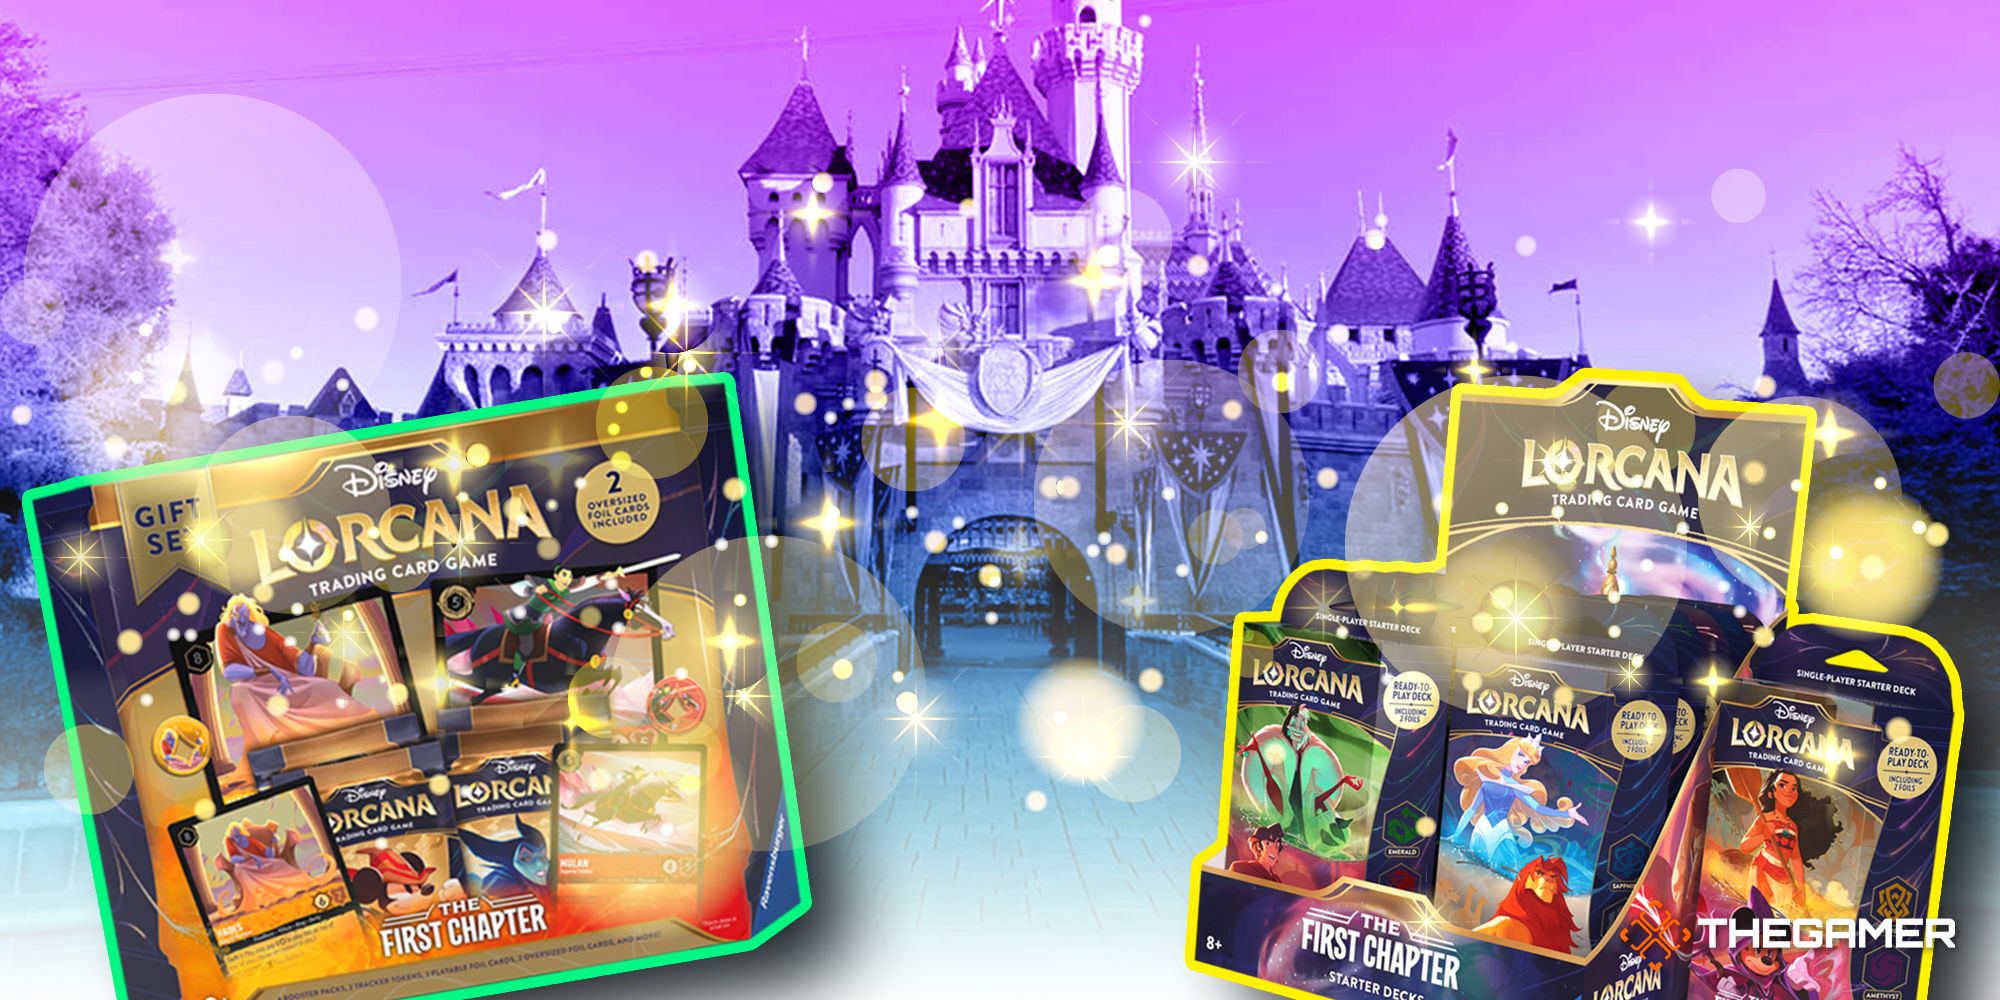 36-Disneyland Is The Best Place To Sell Trading Cards